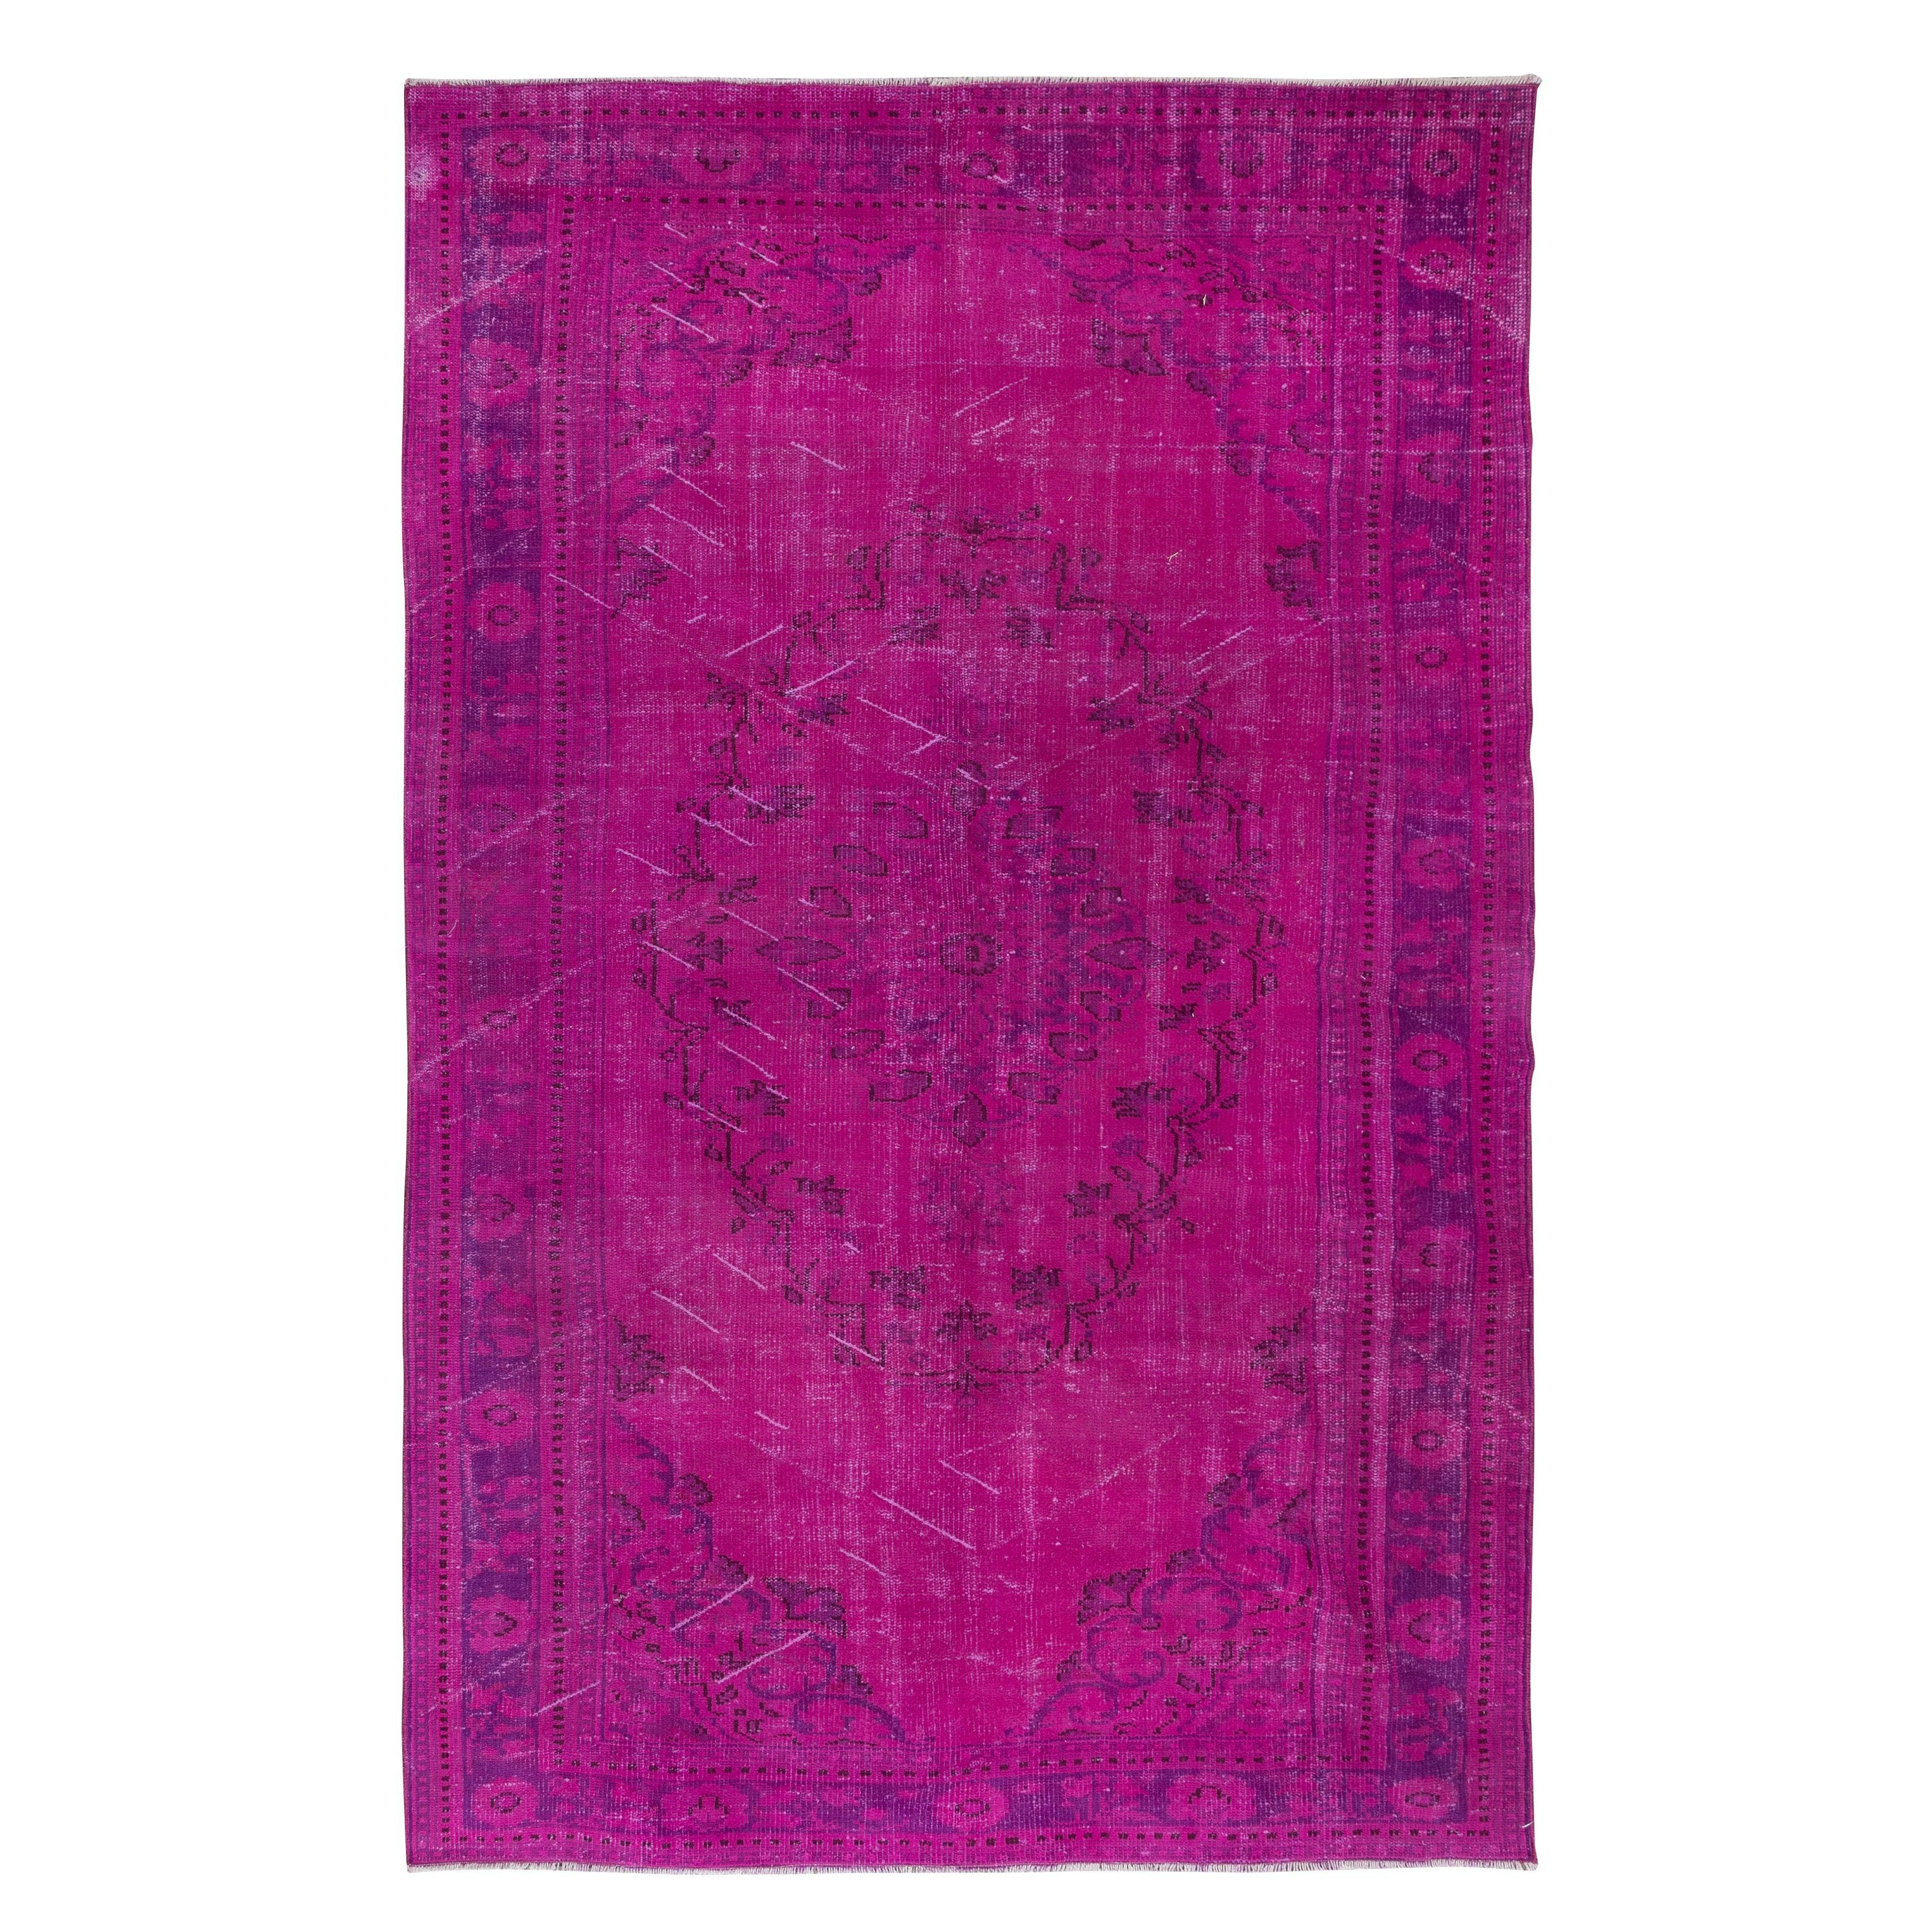 6.3x10 Ft Contemporary Area Rug in Pink & Light Purple, Handmade Turkish Carpet For Sale